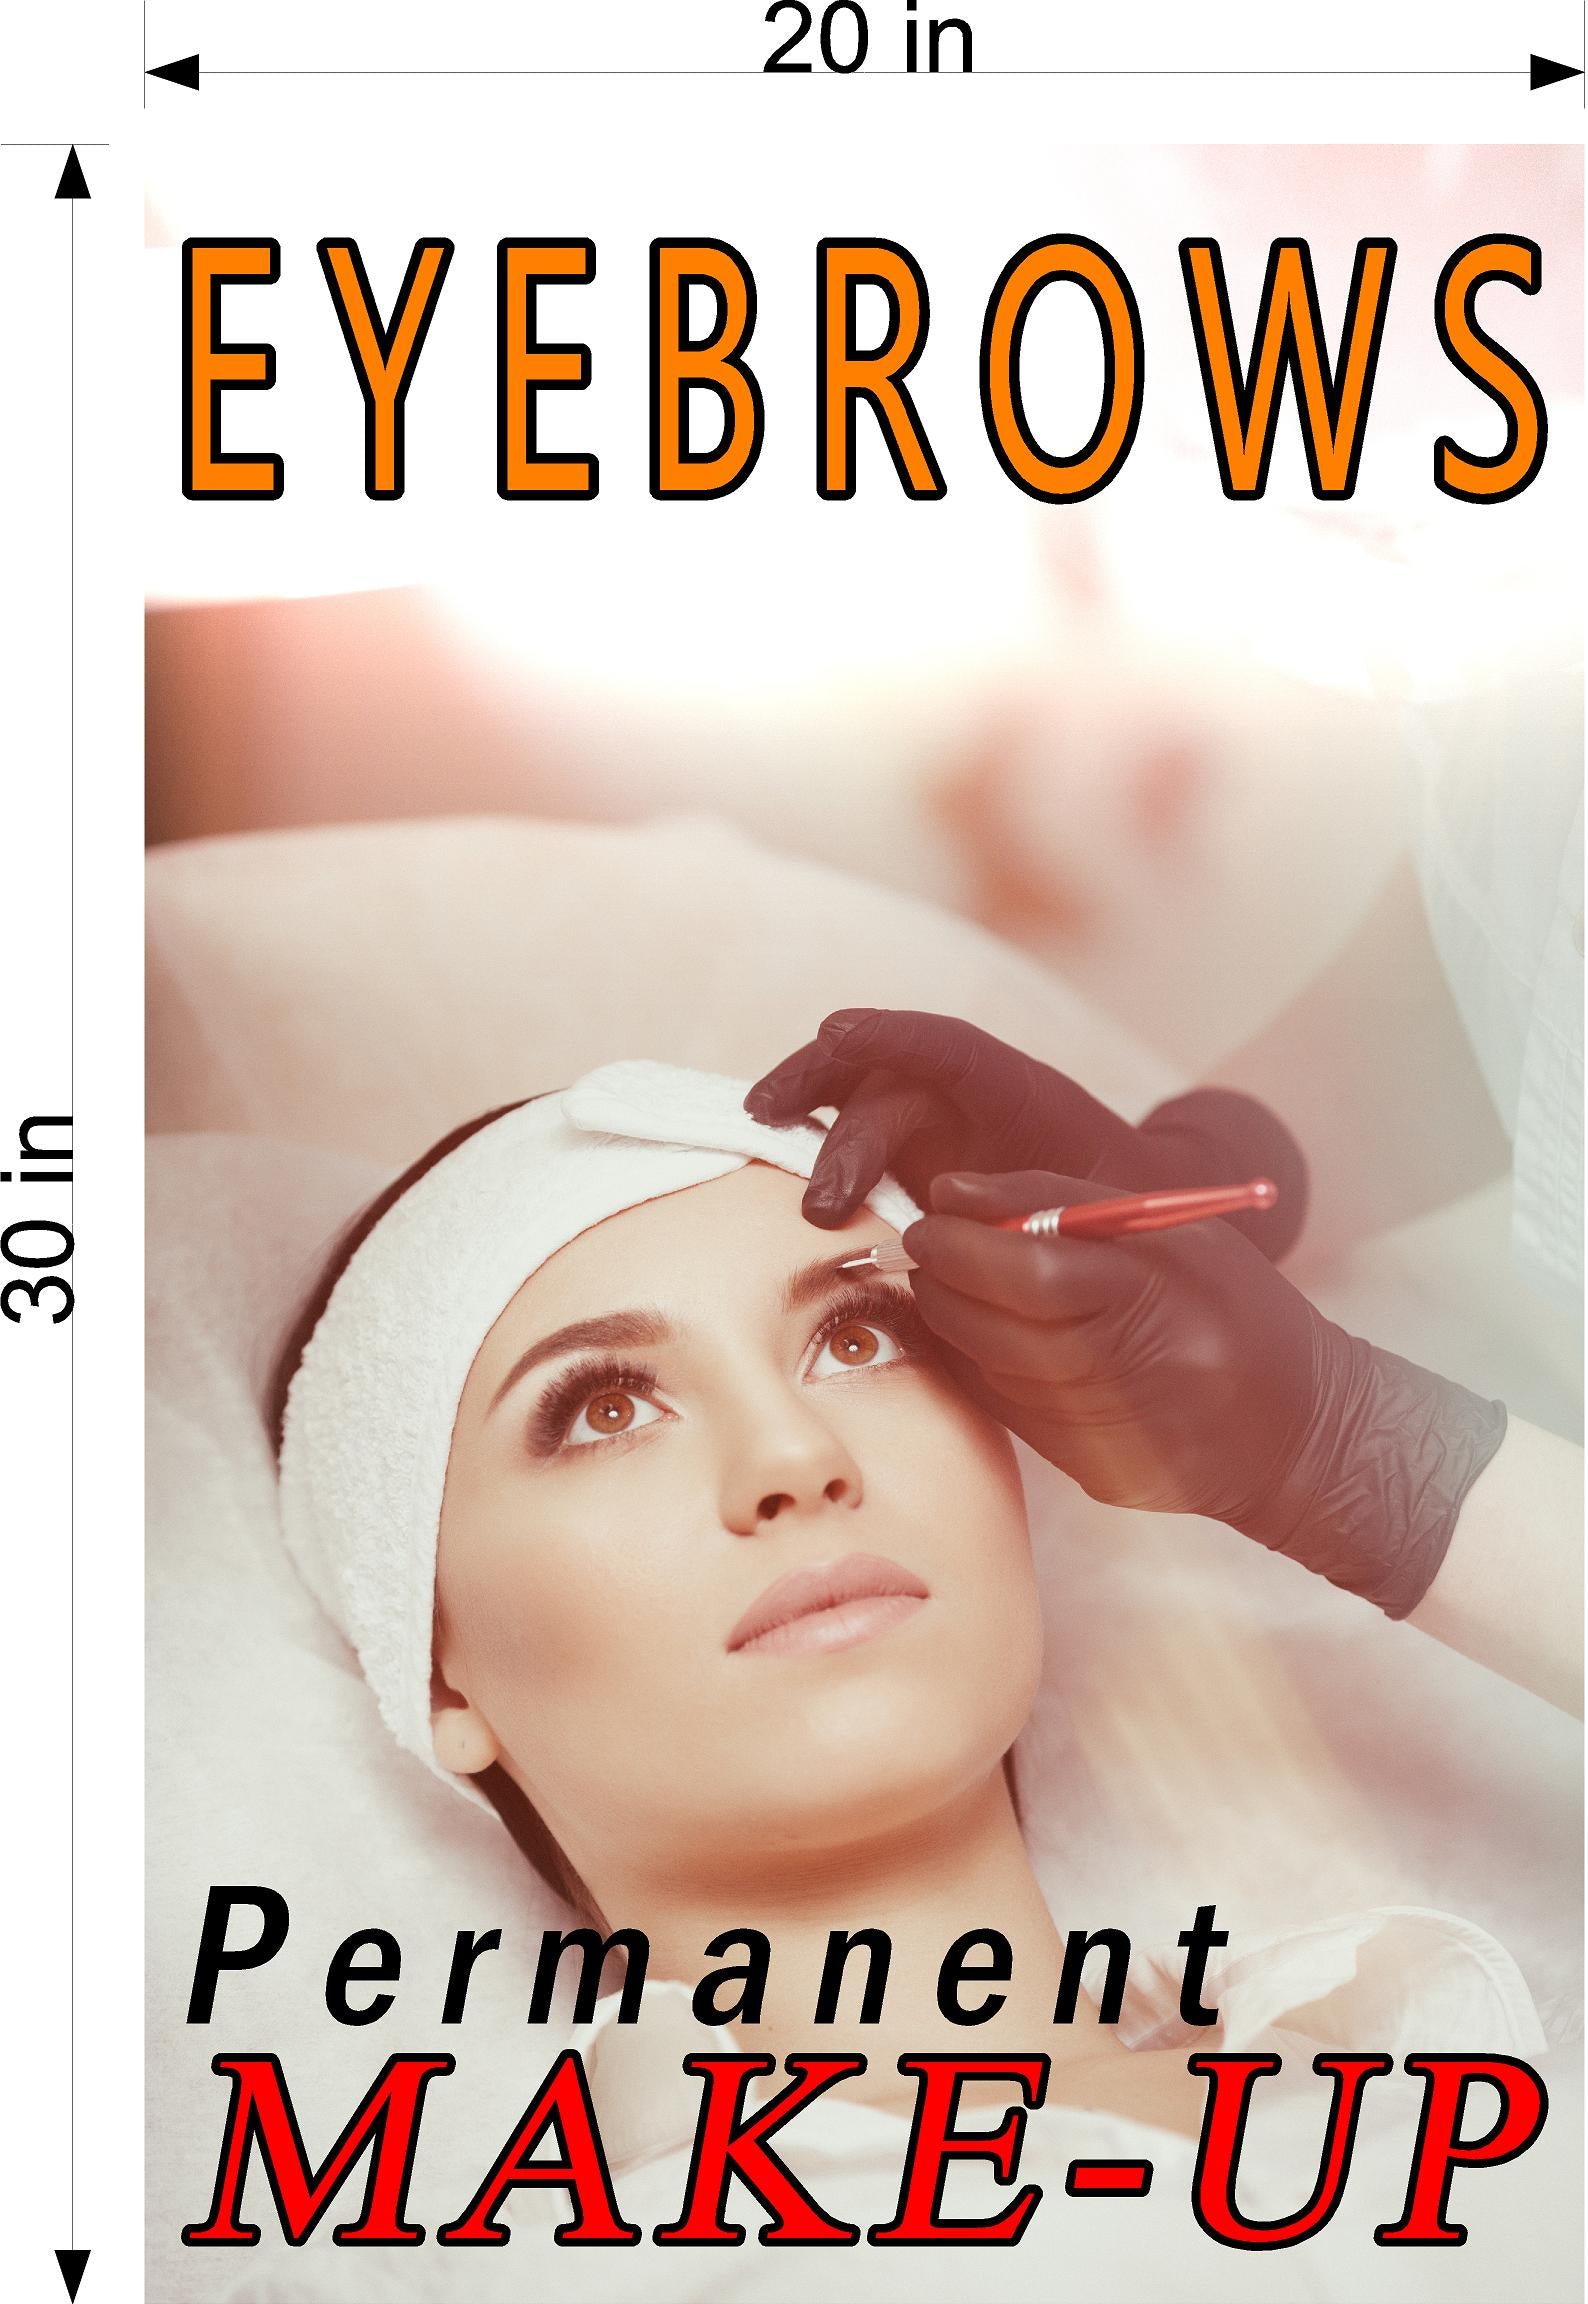 Eyebrows 11 Perforated Mesh One Way Vision See-Through Window Vinyl Salon Sign Permanent Make-Up Vertical